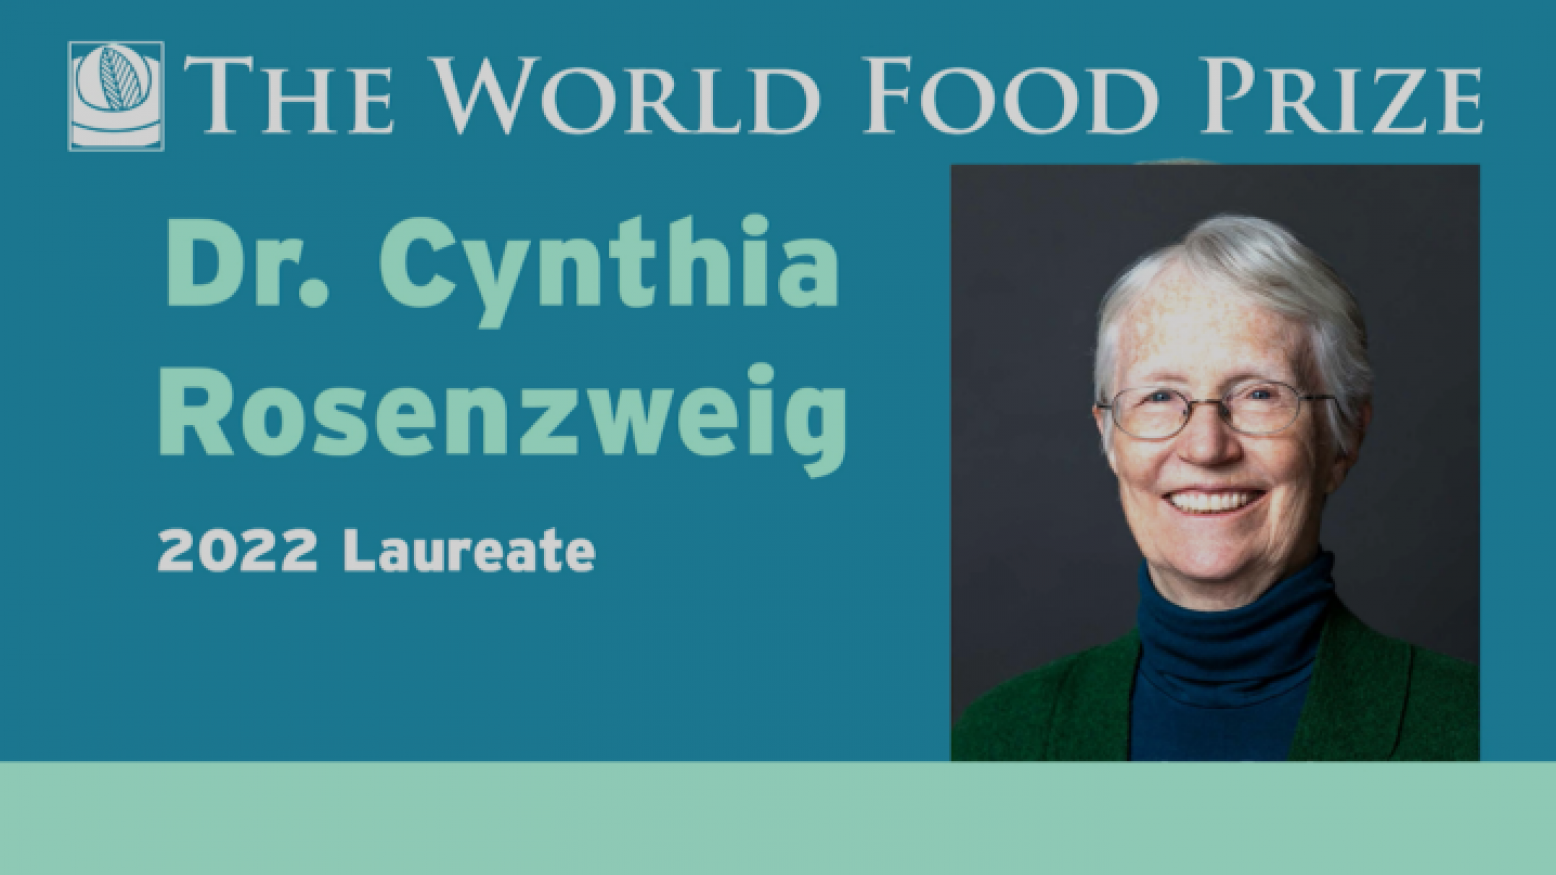 A graphic with text reading: The World Food Prize, Dr. Cynthia Rosenzweig, 2022 Laureate. To the right of the text is a photo of Rosenzweig, a white woman with short gray hair wearing glasses. 